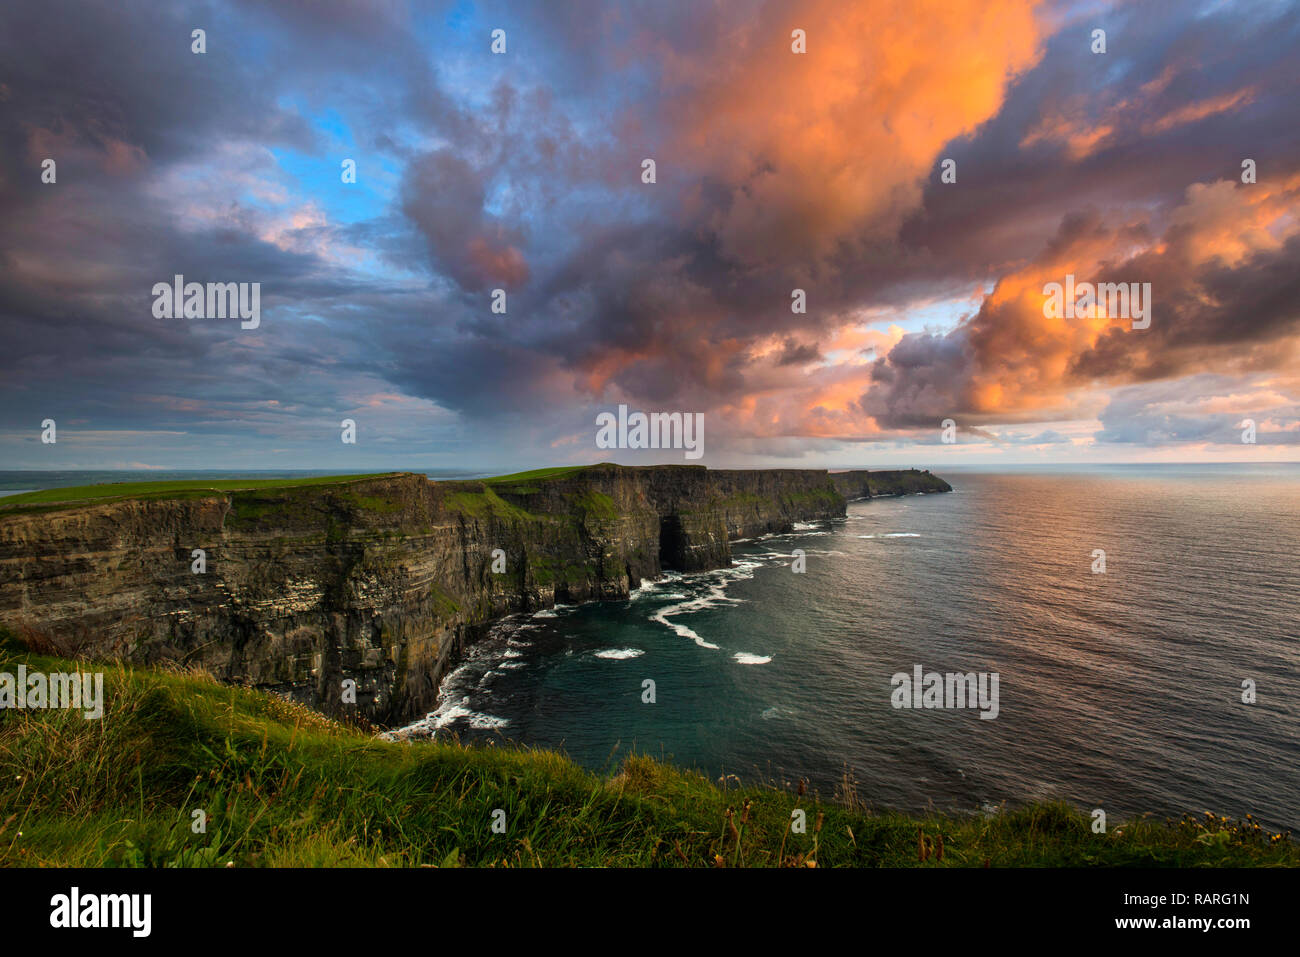 Sunset at the Cliffs of Moher, Co. Clare, Ireland Stock Photo